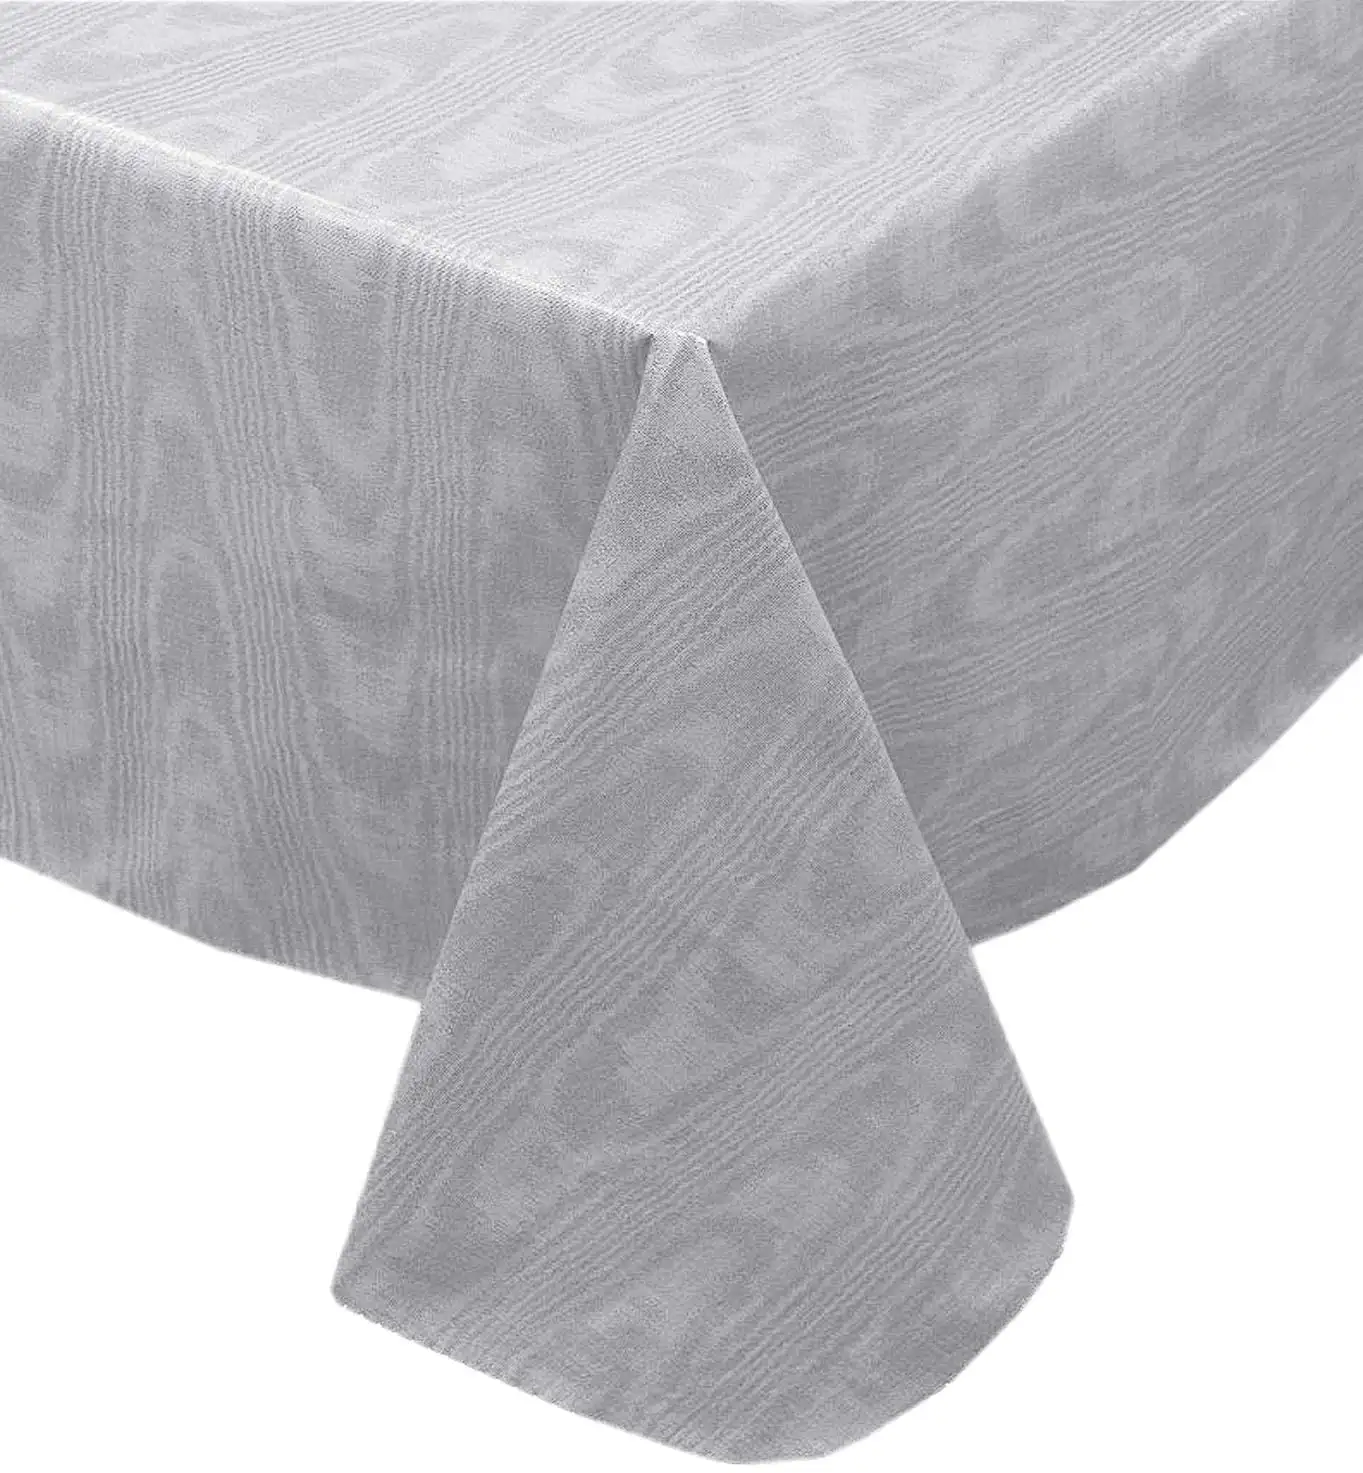 

Gray Moire Wavy Solid Color Print Heavy Gauge Vinyl Flannel Backed Tablecloth, Hotel Quality Heavyweight Wipe Clean Easy Care Ta